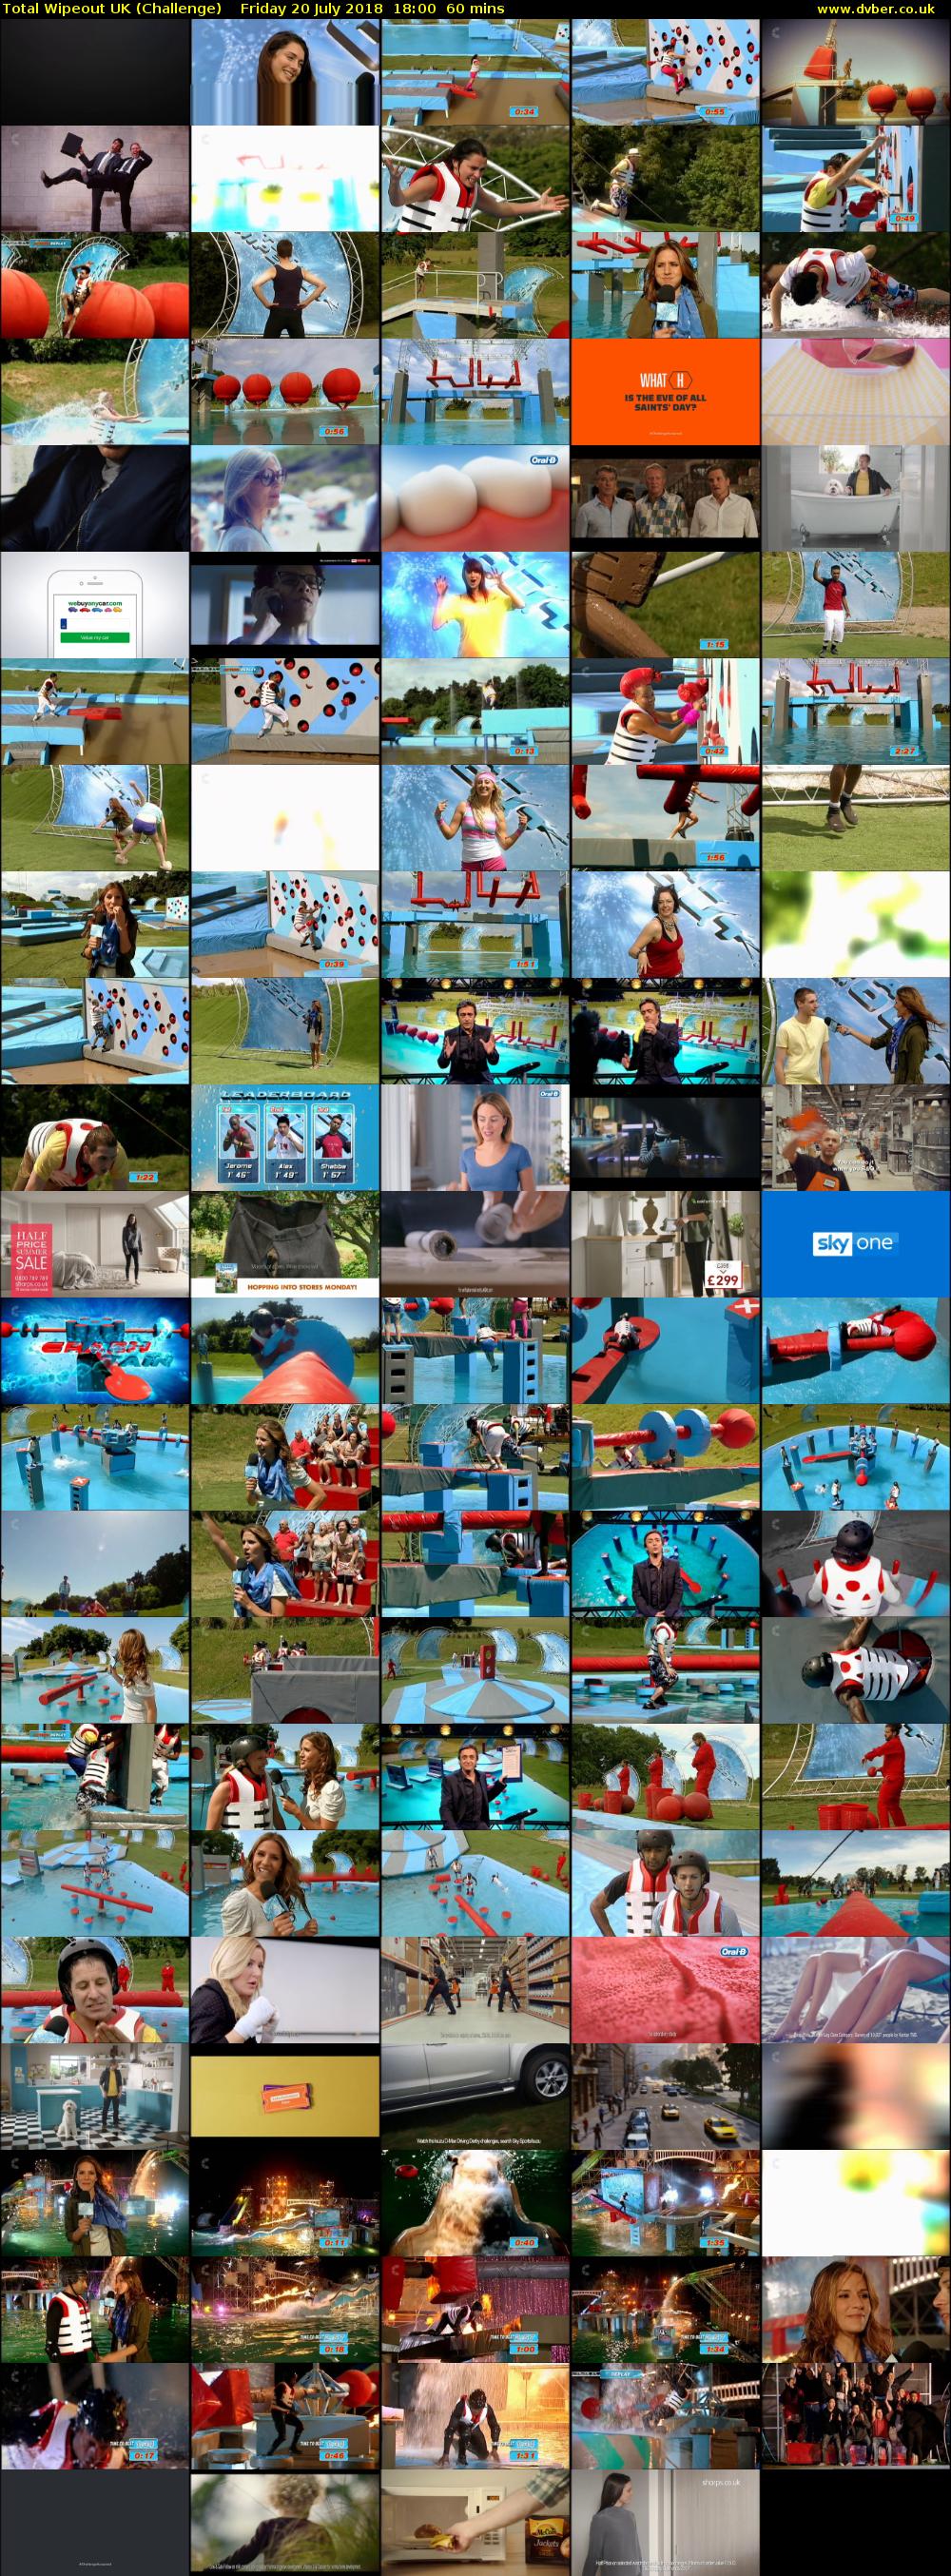 Total Wipeout UK (Challenge) Friday 20 July 2018 18:00 - 19:00